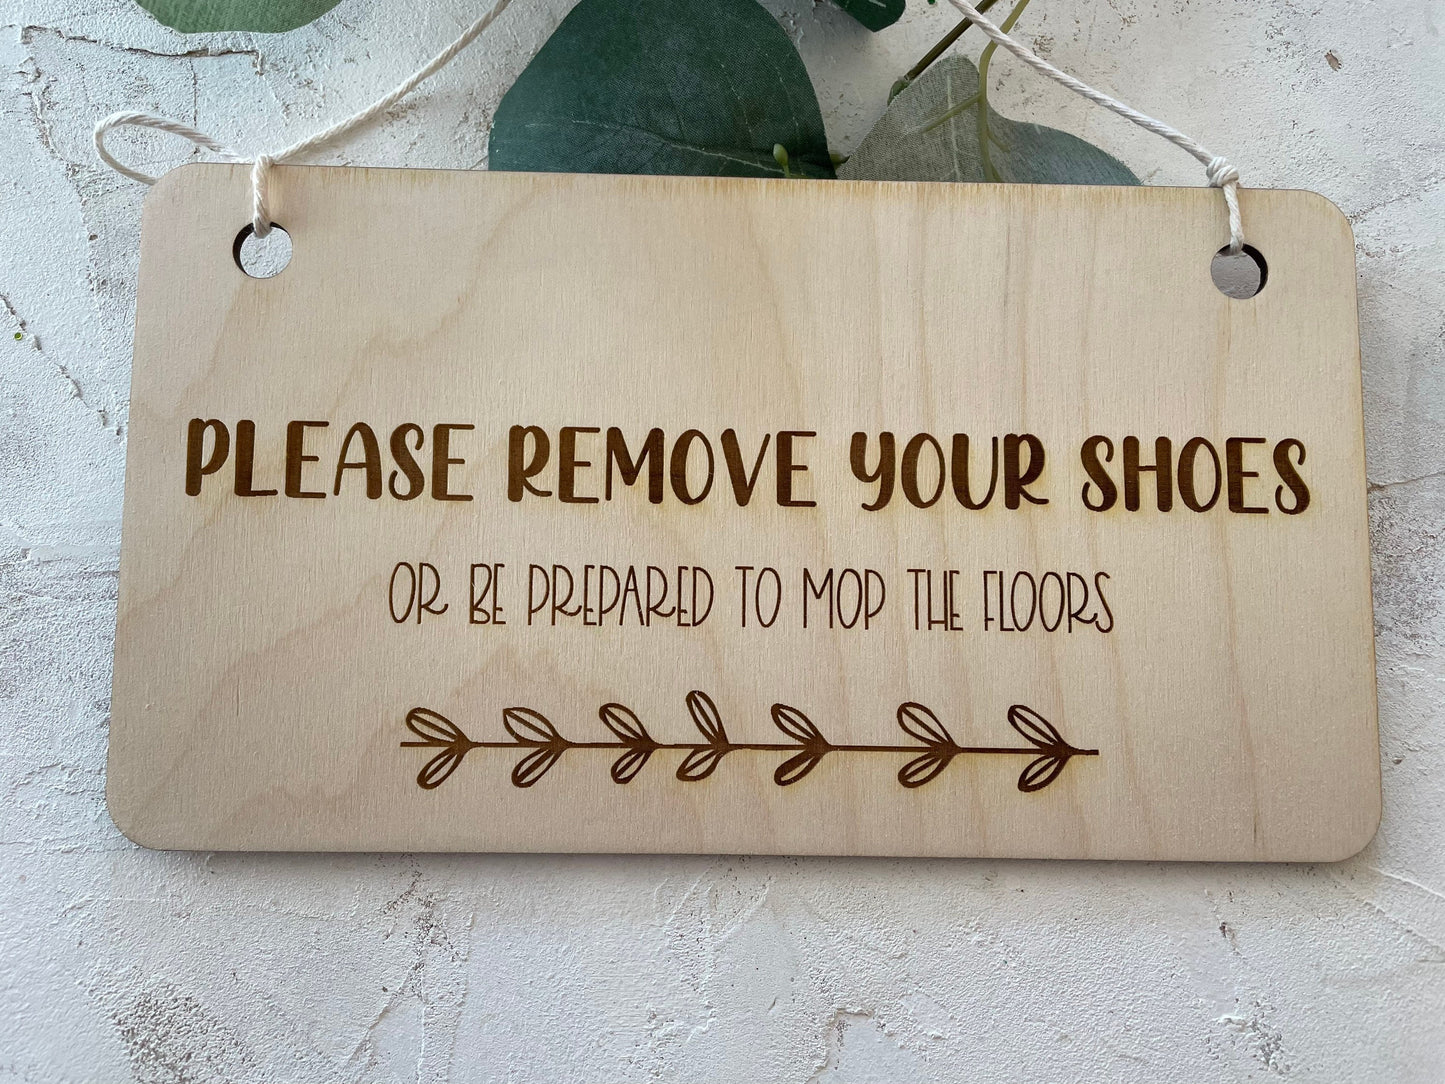 Remove your shoes doorbell sign